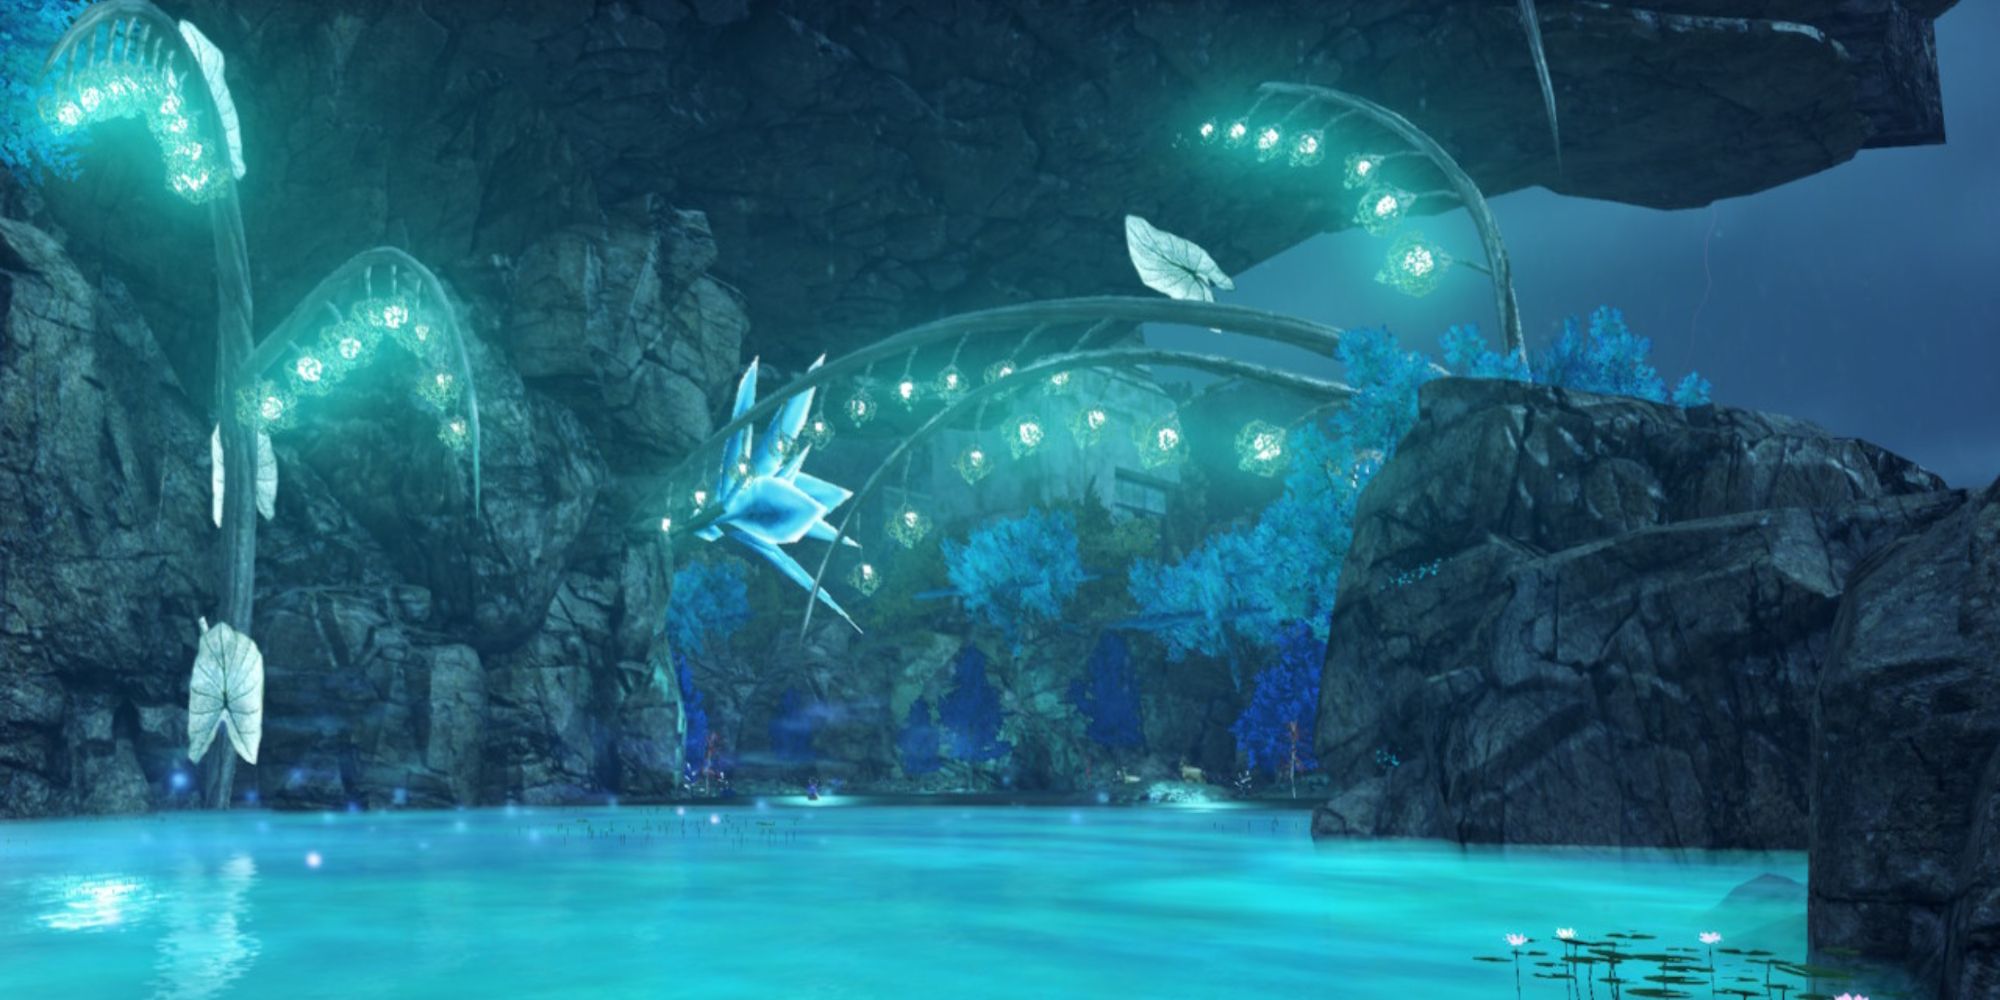 The Cotte Fountainhead in Xenoblade Chronicles 3